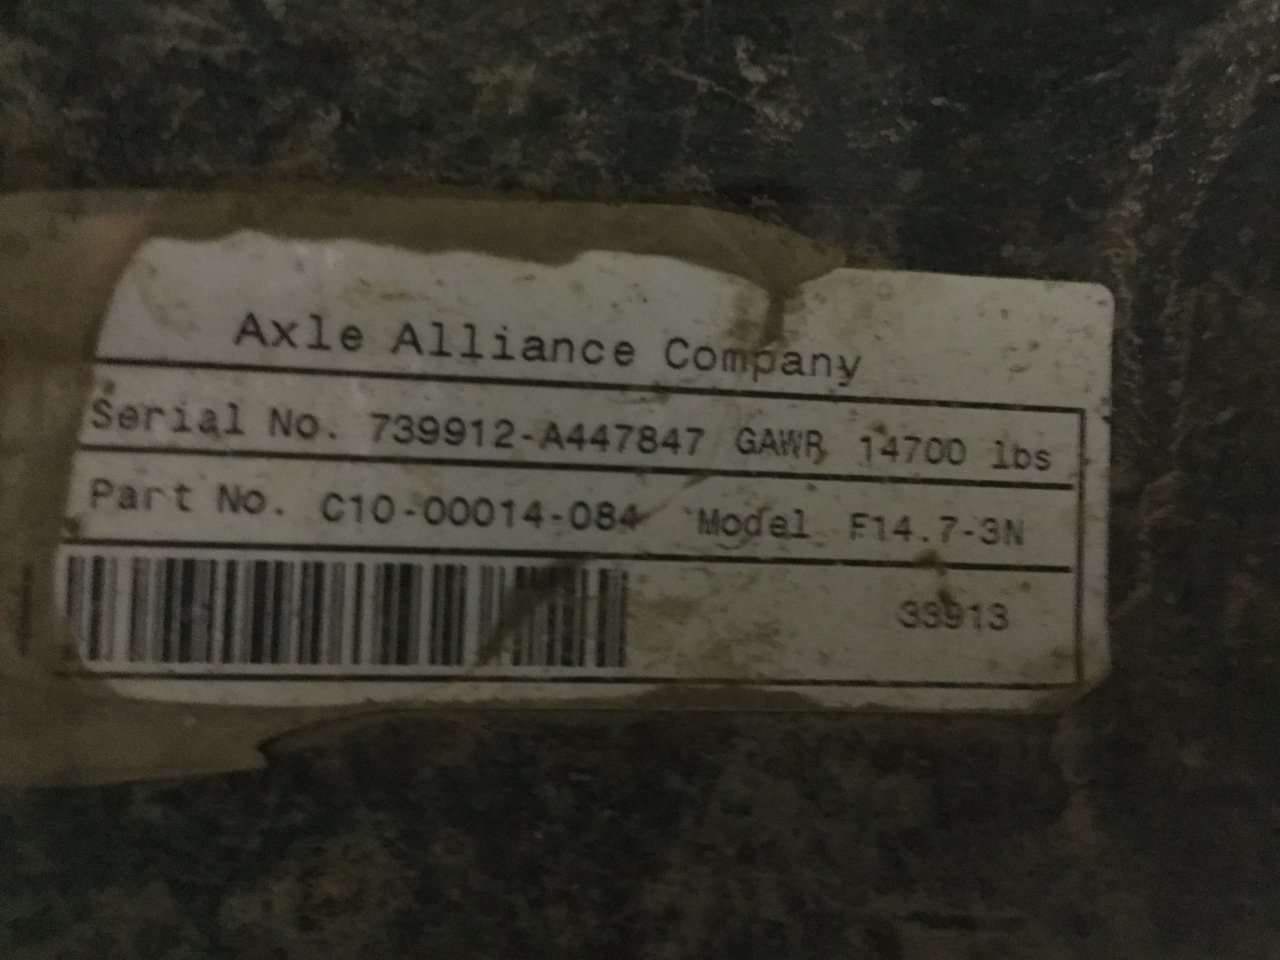 Alliance Axle AF-14.7-3 Axle Assembly, Front - F14.7-3N